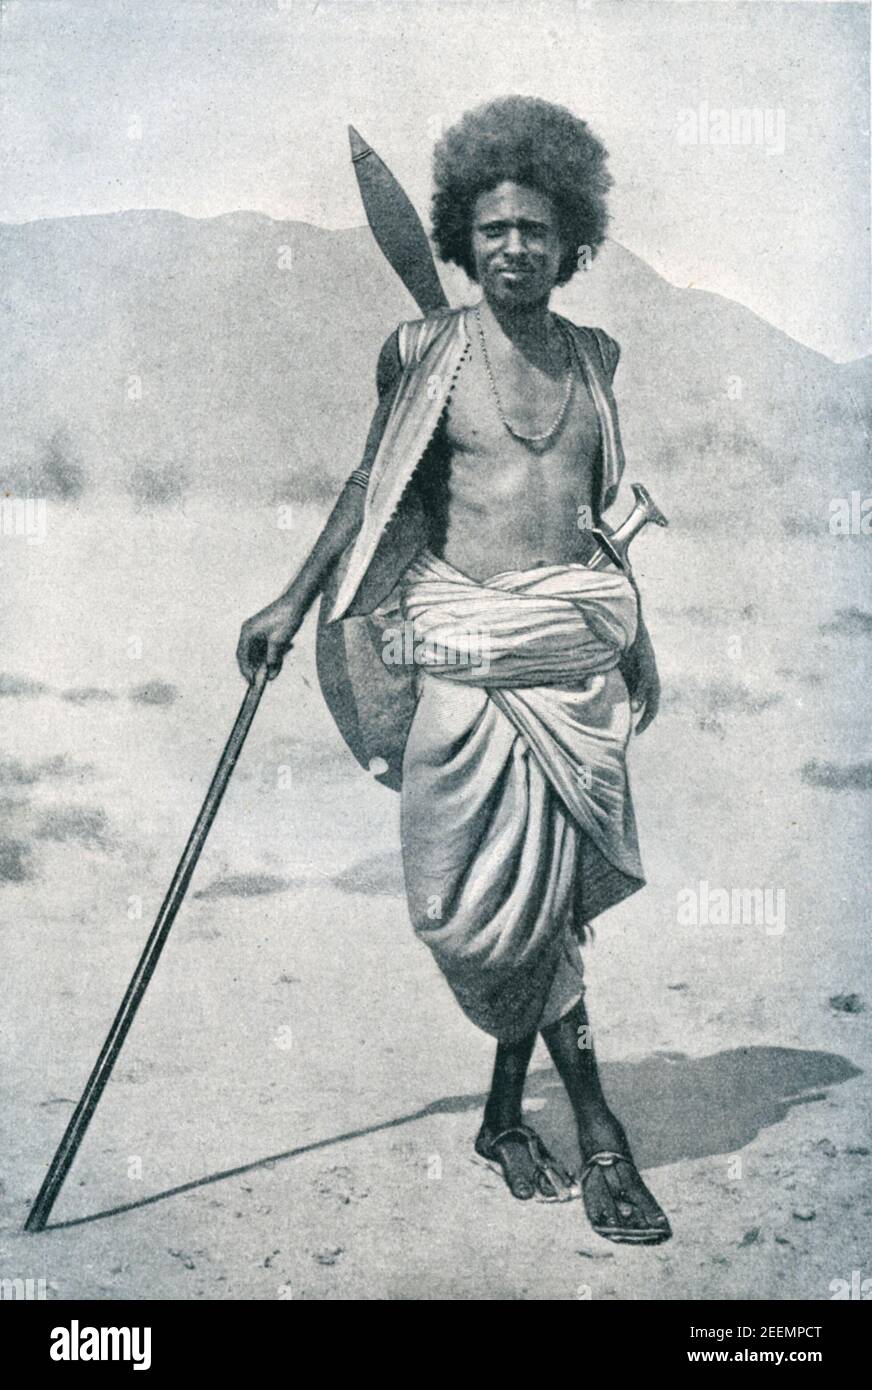 Early 20th century photo of member of the Hadendoa Beja nomadic tribe of eastern Sudan armed with spear, sword and shield. Their hair style (tiffa) gained them the nick name Fuzzy Wuzzy among British troops during the Mahdist War of the 1880-1890s Stock Photo